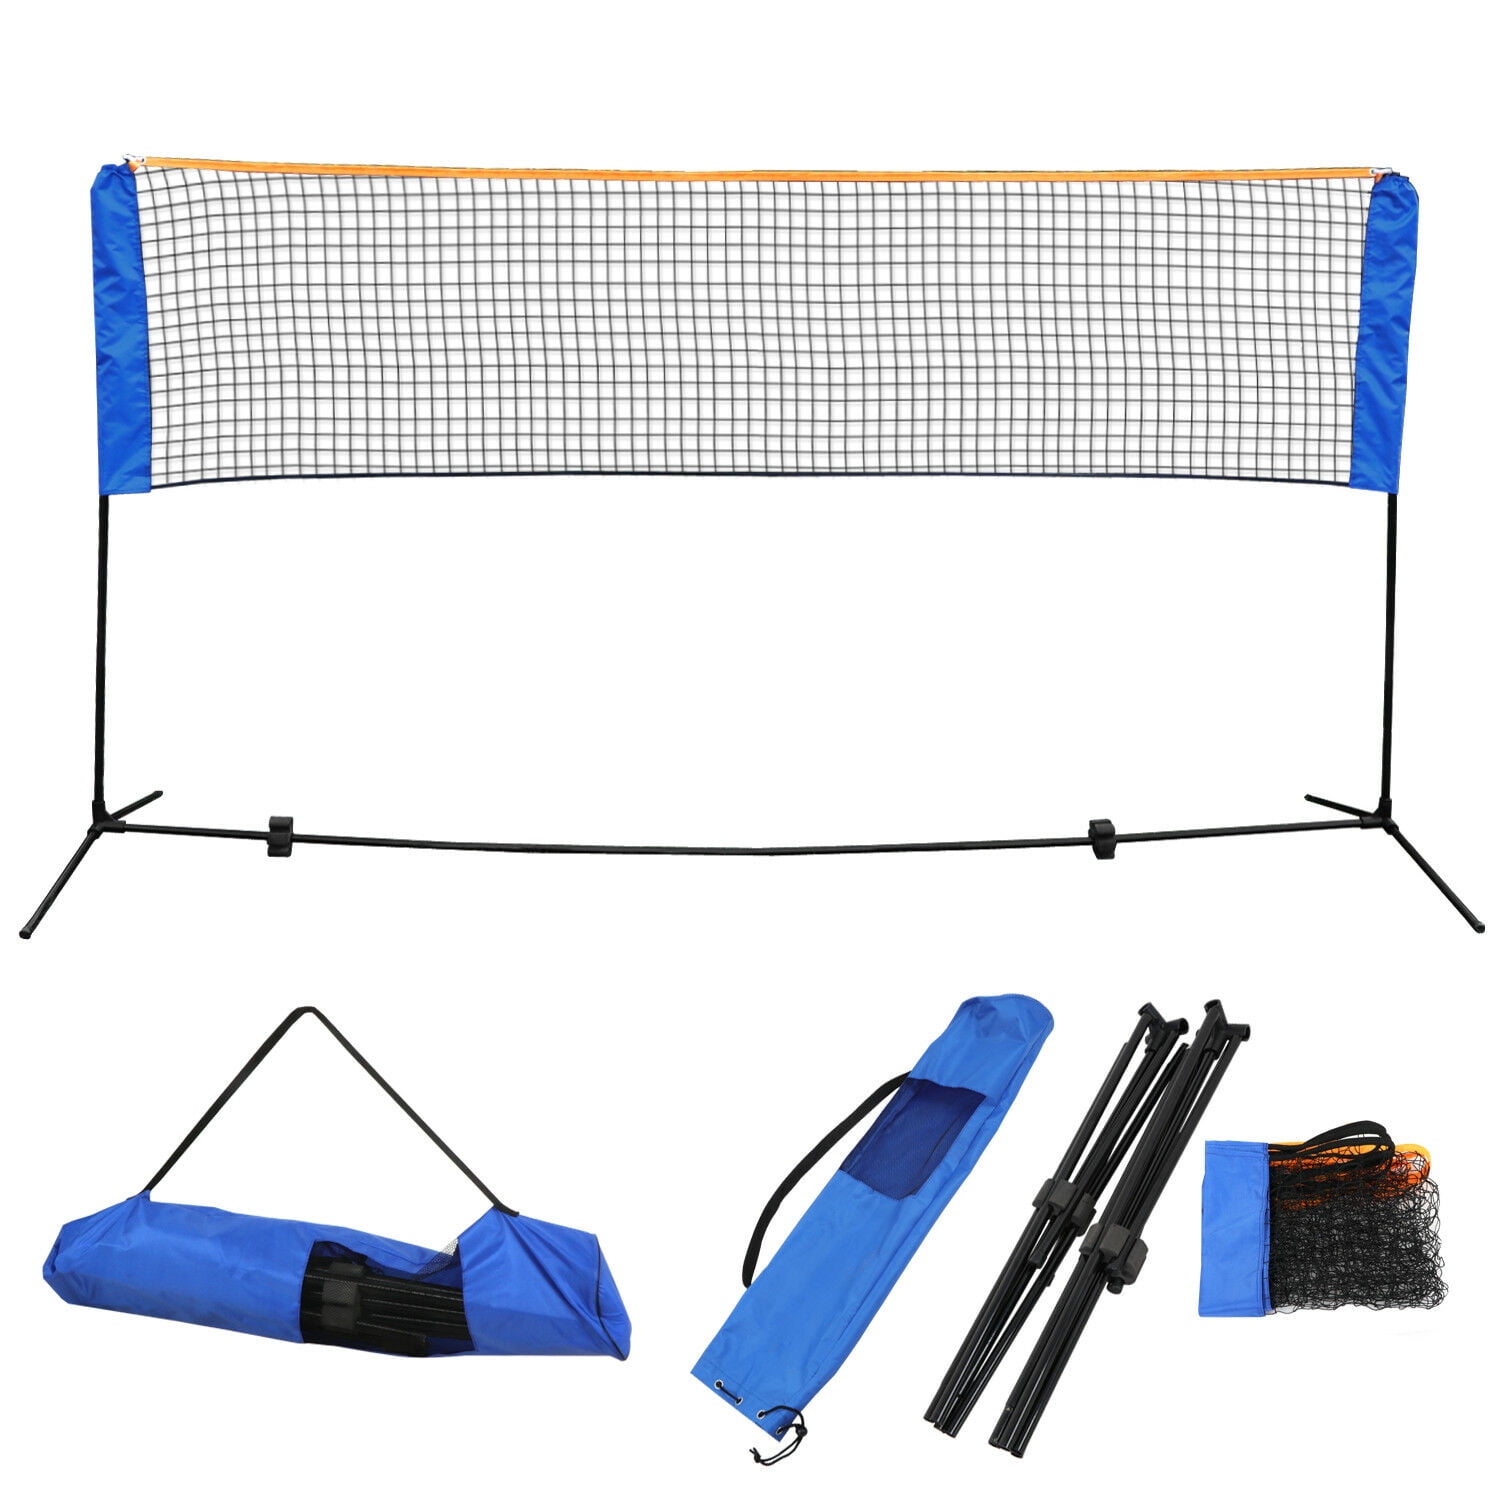 Large 5m Adjustable Mini Foldable Badminton Tennis Volleyball Net w/ Carry Bag 